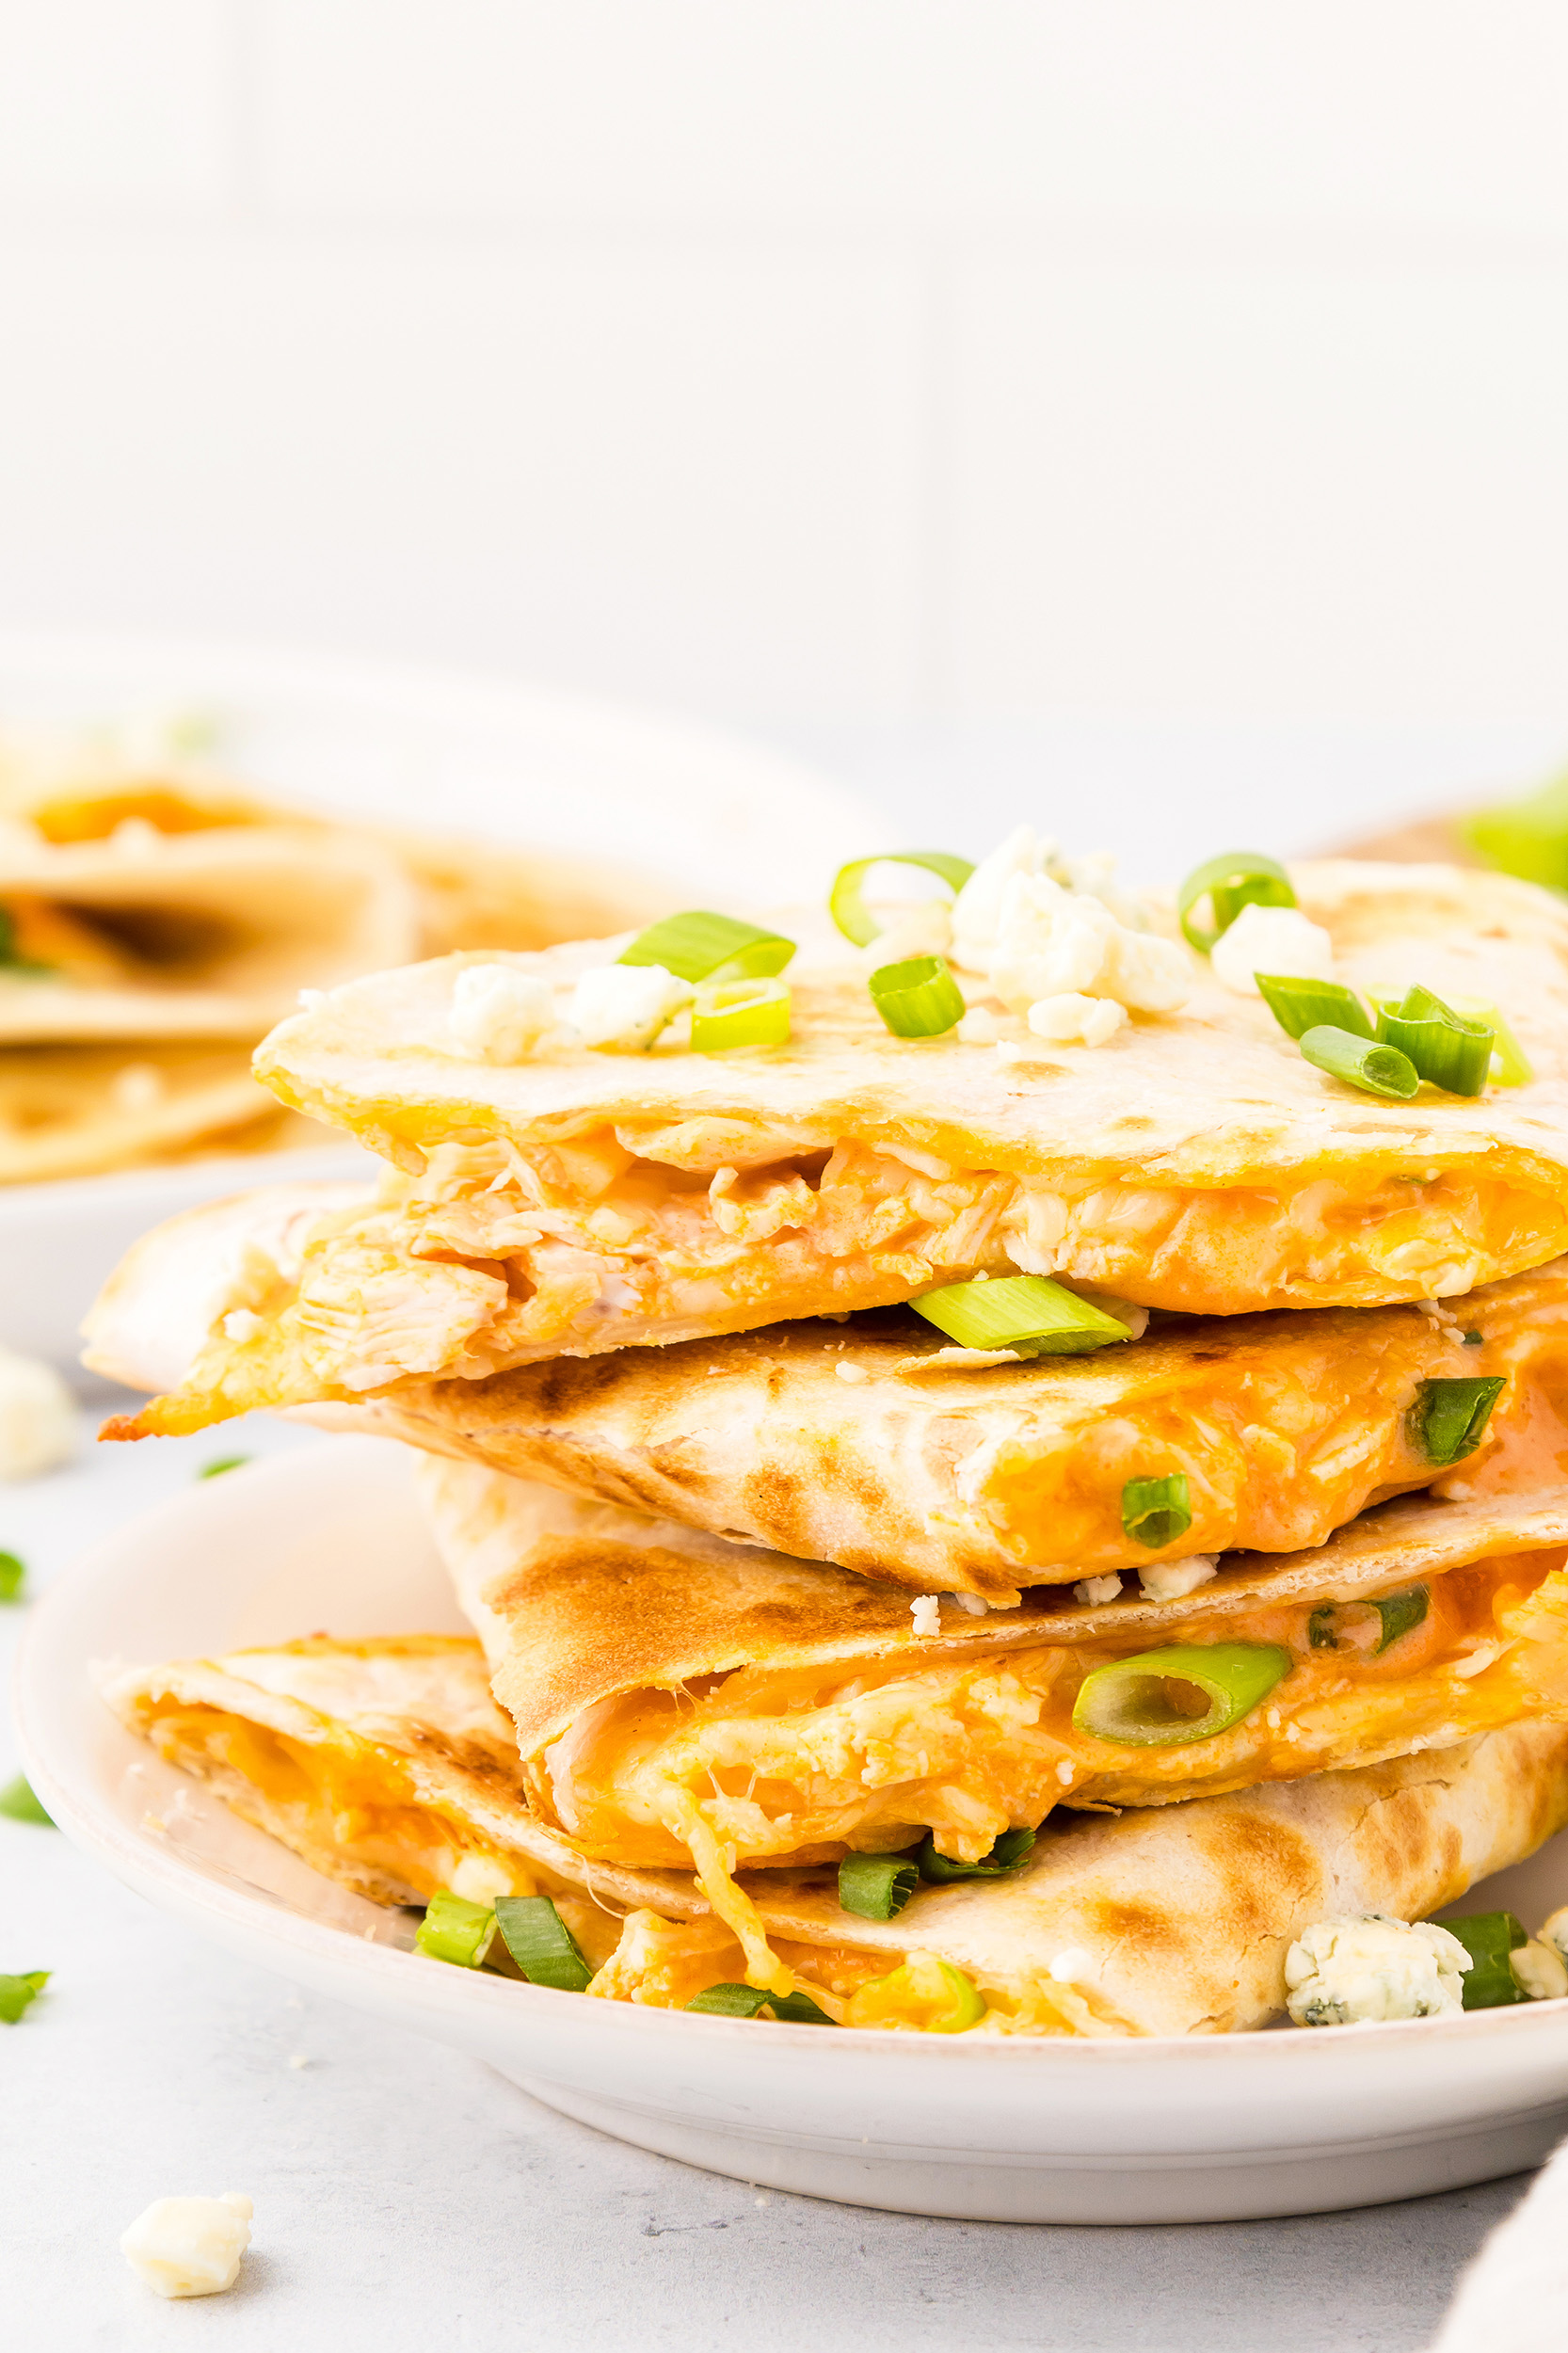 gooey cheese and green onions can be seen inside the buffalo chicken quesadilla